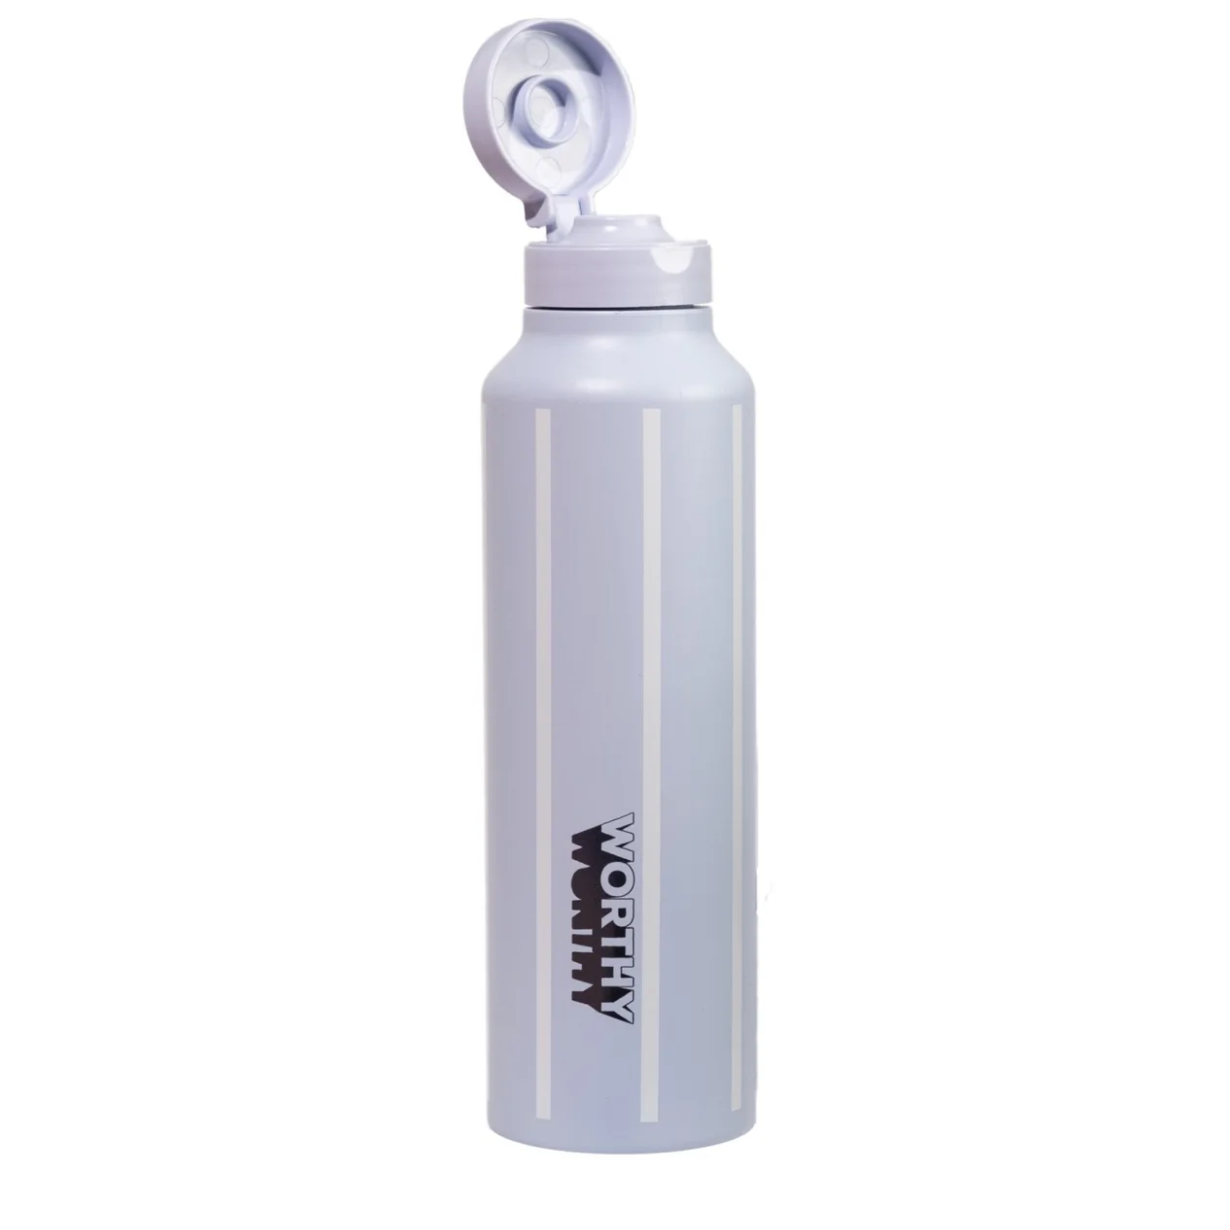 Worthy Sugarcane Drink Bottle 750ml, Please Choose Your Favourite Style